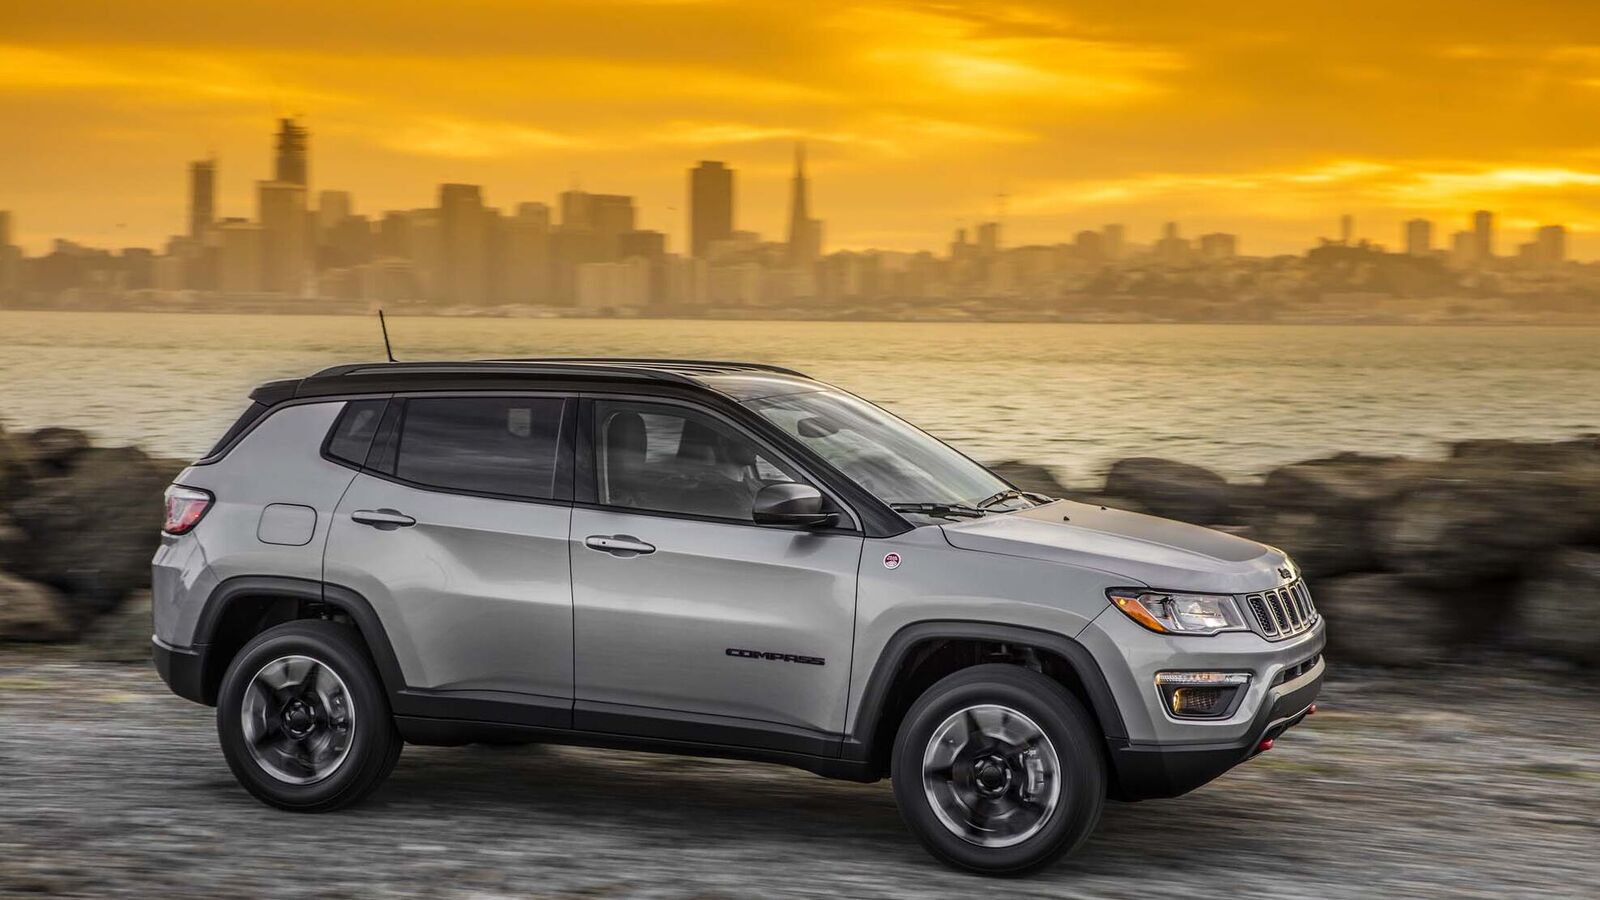 https://images.hindustantimes.com/auto/img/2022/02/19/1600x900/2017-Jeep-Compass-Trailhawk-side-in-motion_1645257472914_1645257479458.jpg